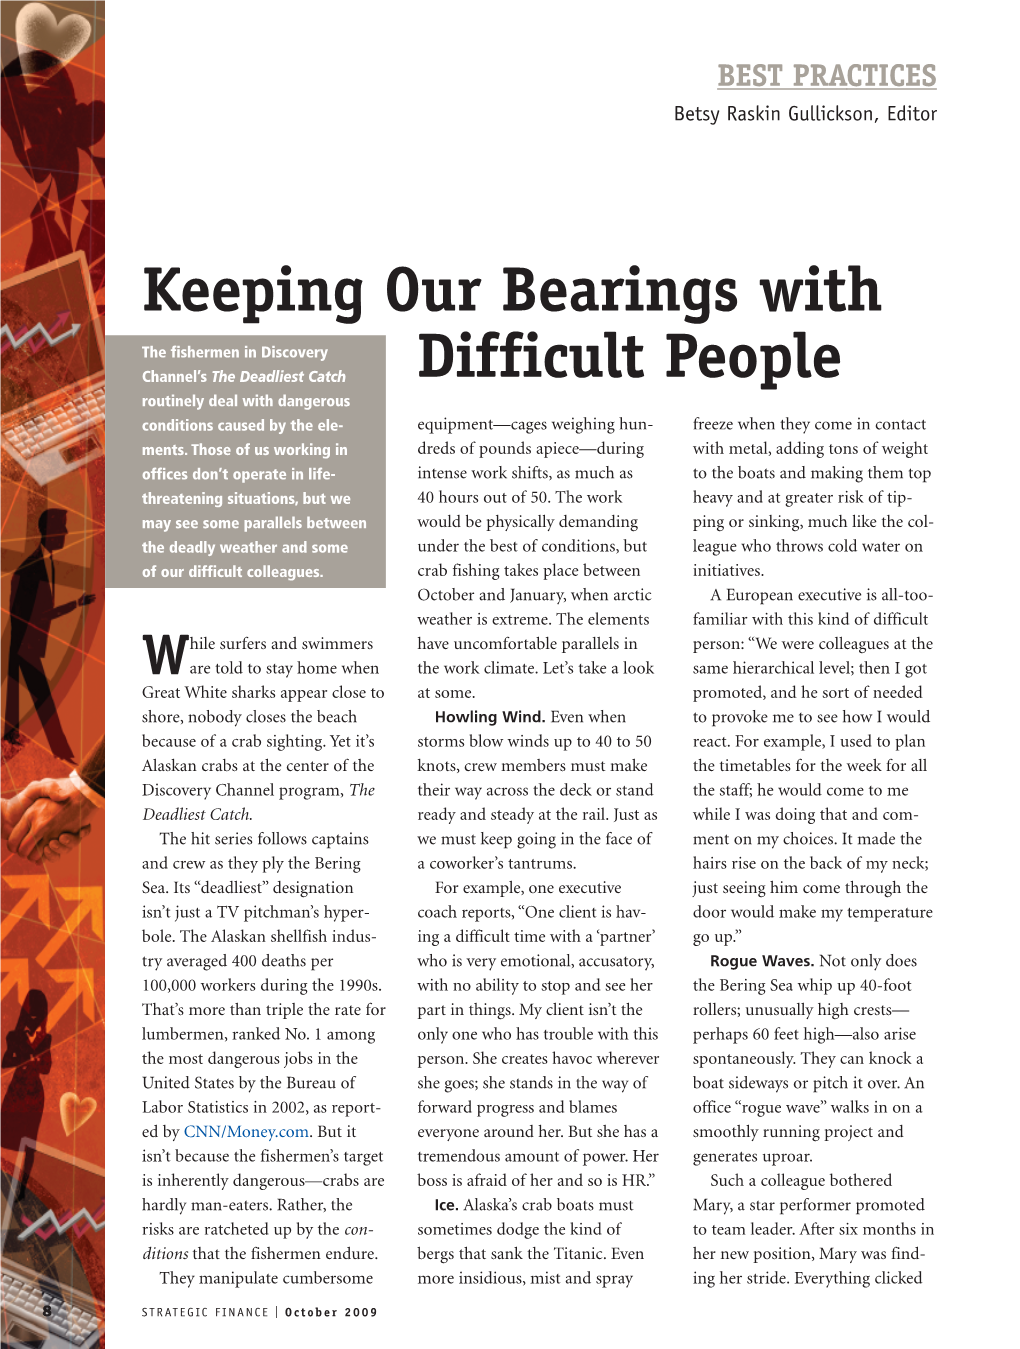 Keeping Our Bearings with Difficult People